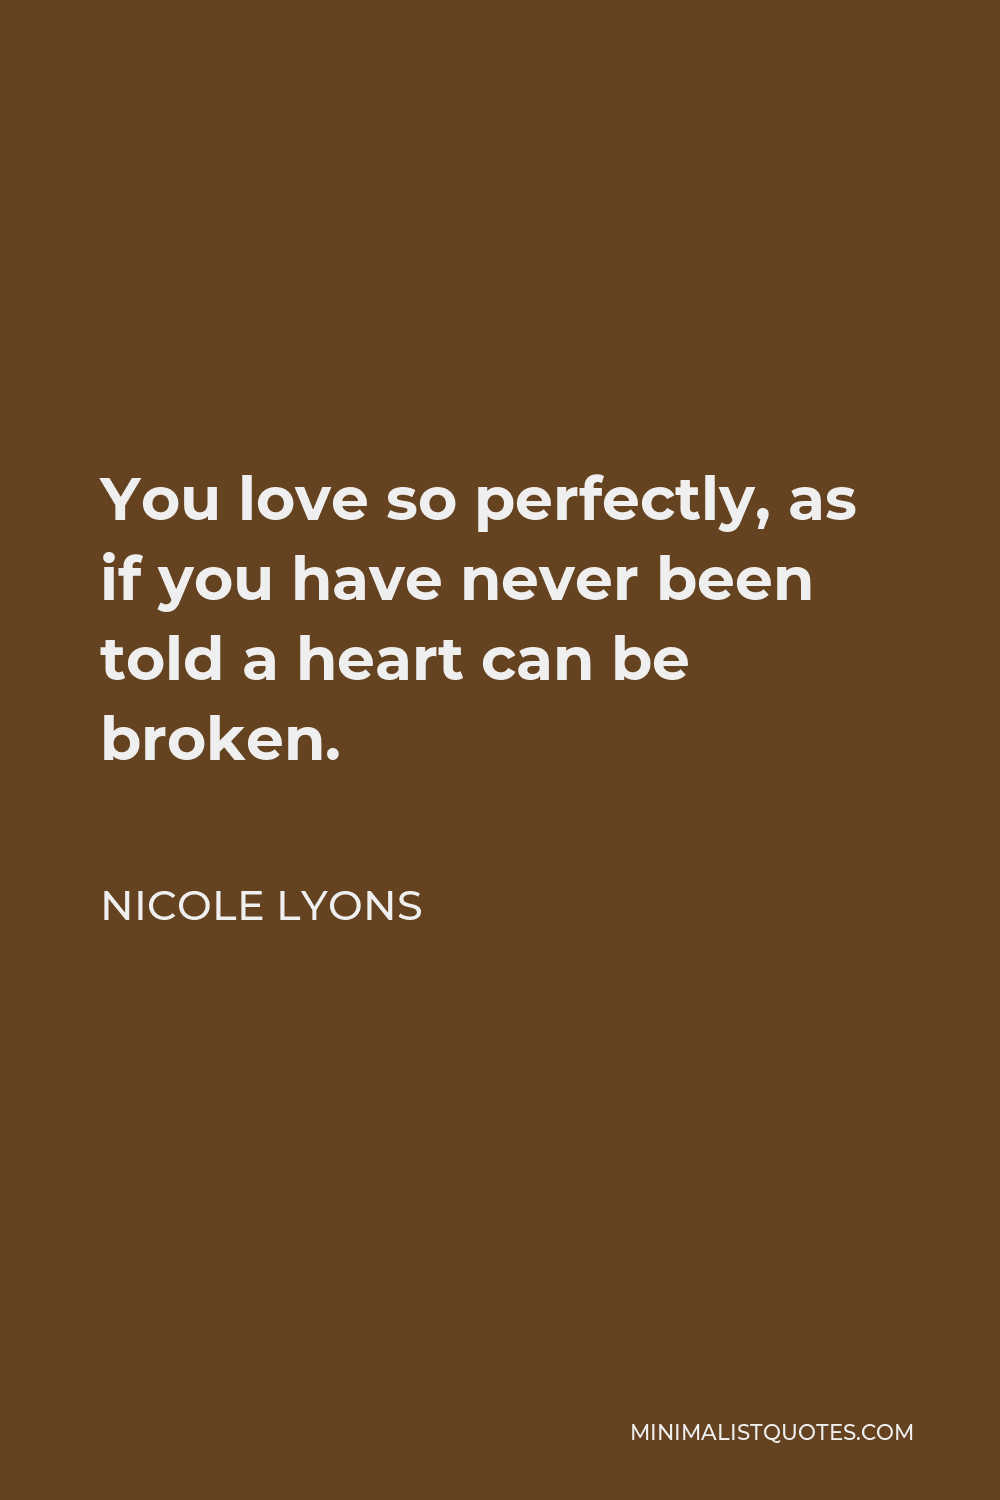 Nicole Lyons Quote - You love so perfectly, as if you have never been told a heart can be broken.